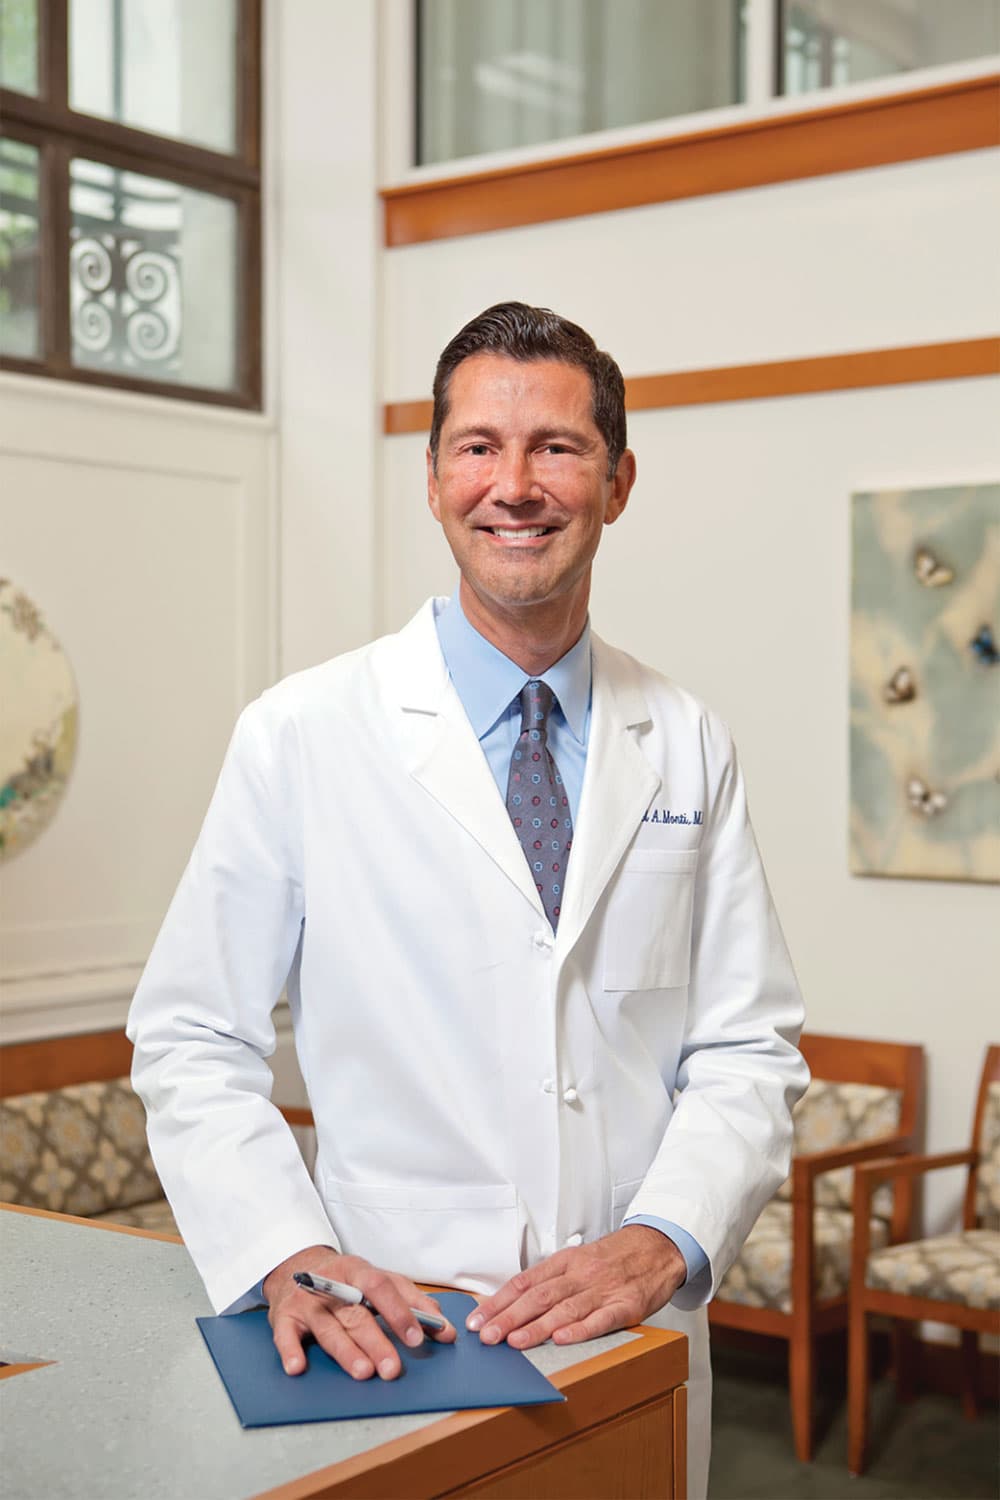 Dr. Daniel Monti, Integrative medicine doctor, pictured in white coat. A patient may be interested in integrative medicine services and clinic if they have the following interests: preventive medicine, healthy aging, prevention, whole person wellness, nutritional healing, integrative and alternative cancer therapies, holistic medicine, medical herbalism, alternative medicine, Vitamins and supplements, naturopathic doctors, complementary medicine, alternative medicine, holistic medicine, naturopathic medicine, functional medicine, mind body medicine, traditional medicine, Ayurvedic medicine, Chinese medicine, homeopathy, herbal medicine, integrative health, integrative therapy, integrative nutrition, integrative oncology, integrative psychiatry, integrative cardiology, integrative pediatrics, integrative gastroenterology, leaky gut, acupuncture, disease, meditation, complementary therapies, massage therapy, psychotherapy, holistic health, herbal medicine, preventive medicine, integrative primary care, alternatives to traditional primary care, alternative treatment of illness and cognitive decline.